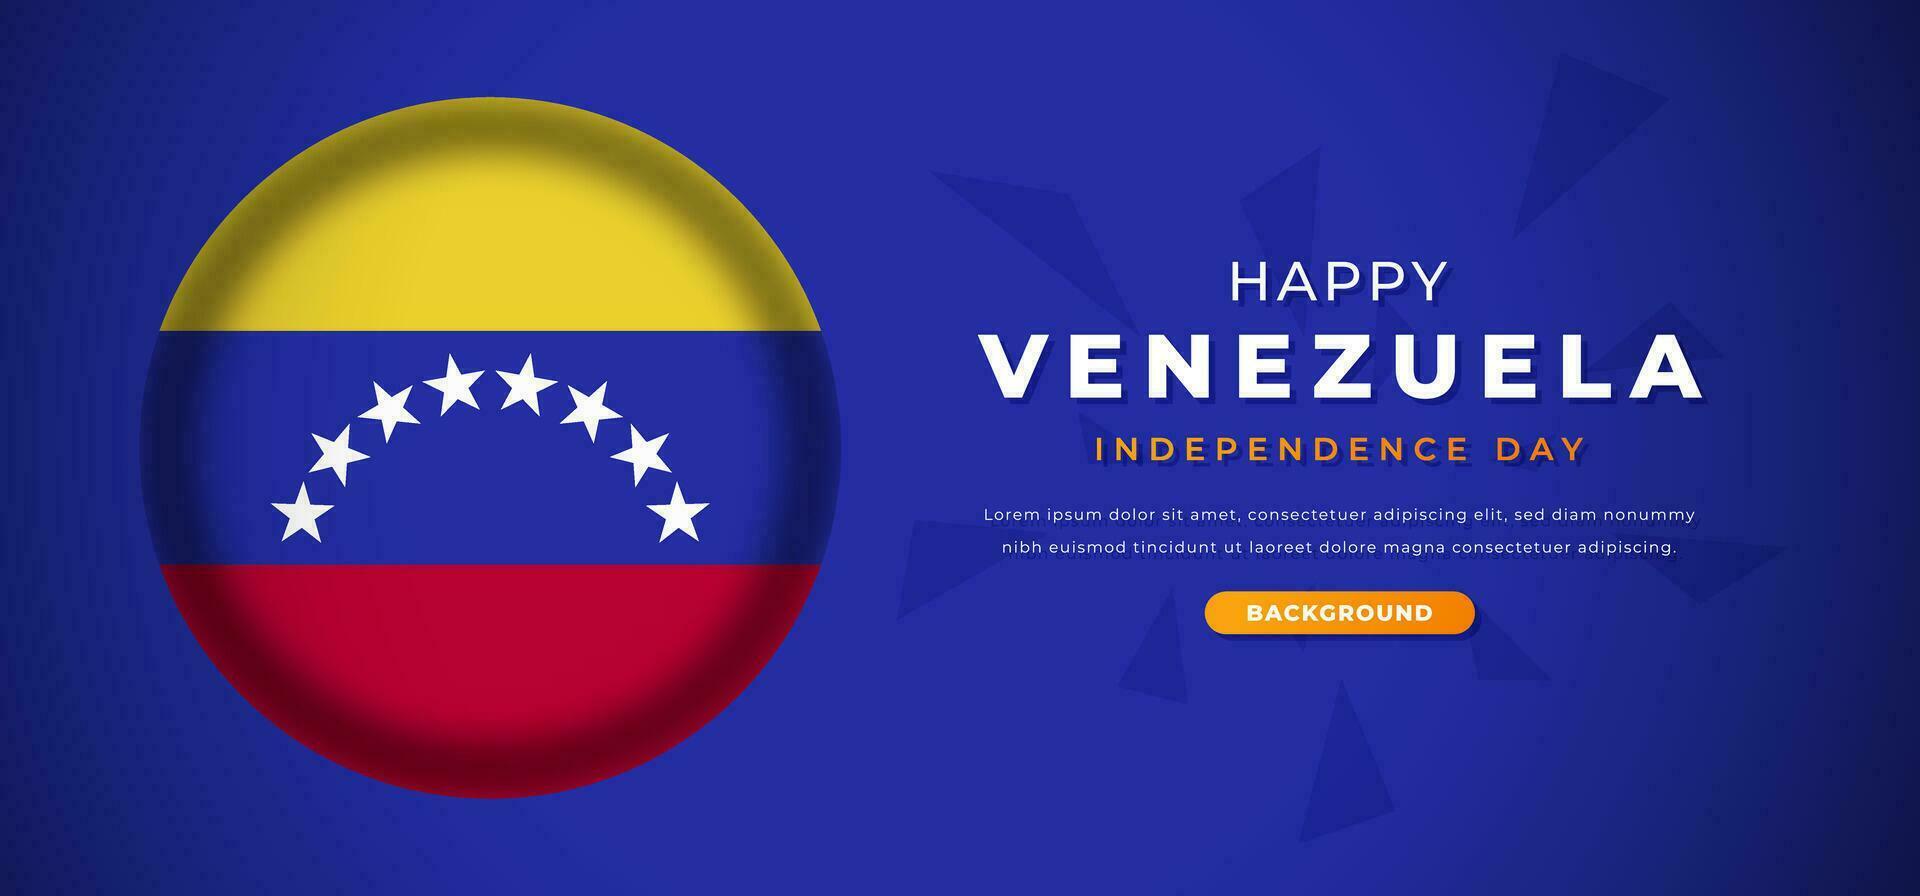 Happy Venezuela Independence Day Design Paper Cut Shapes Background Illustration for Poster, Banner, Advertising, Greeting Card vector